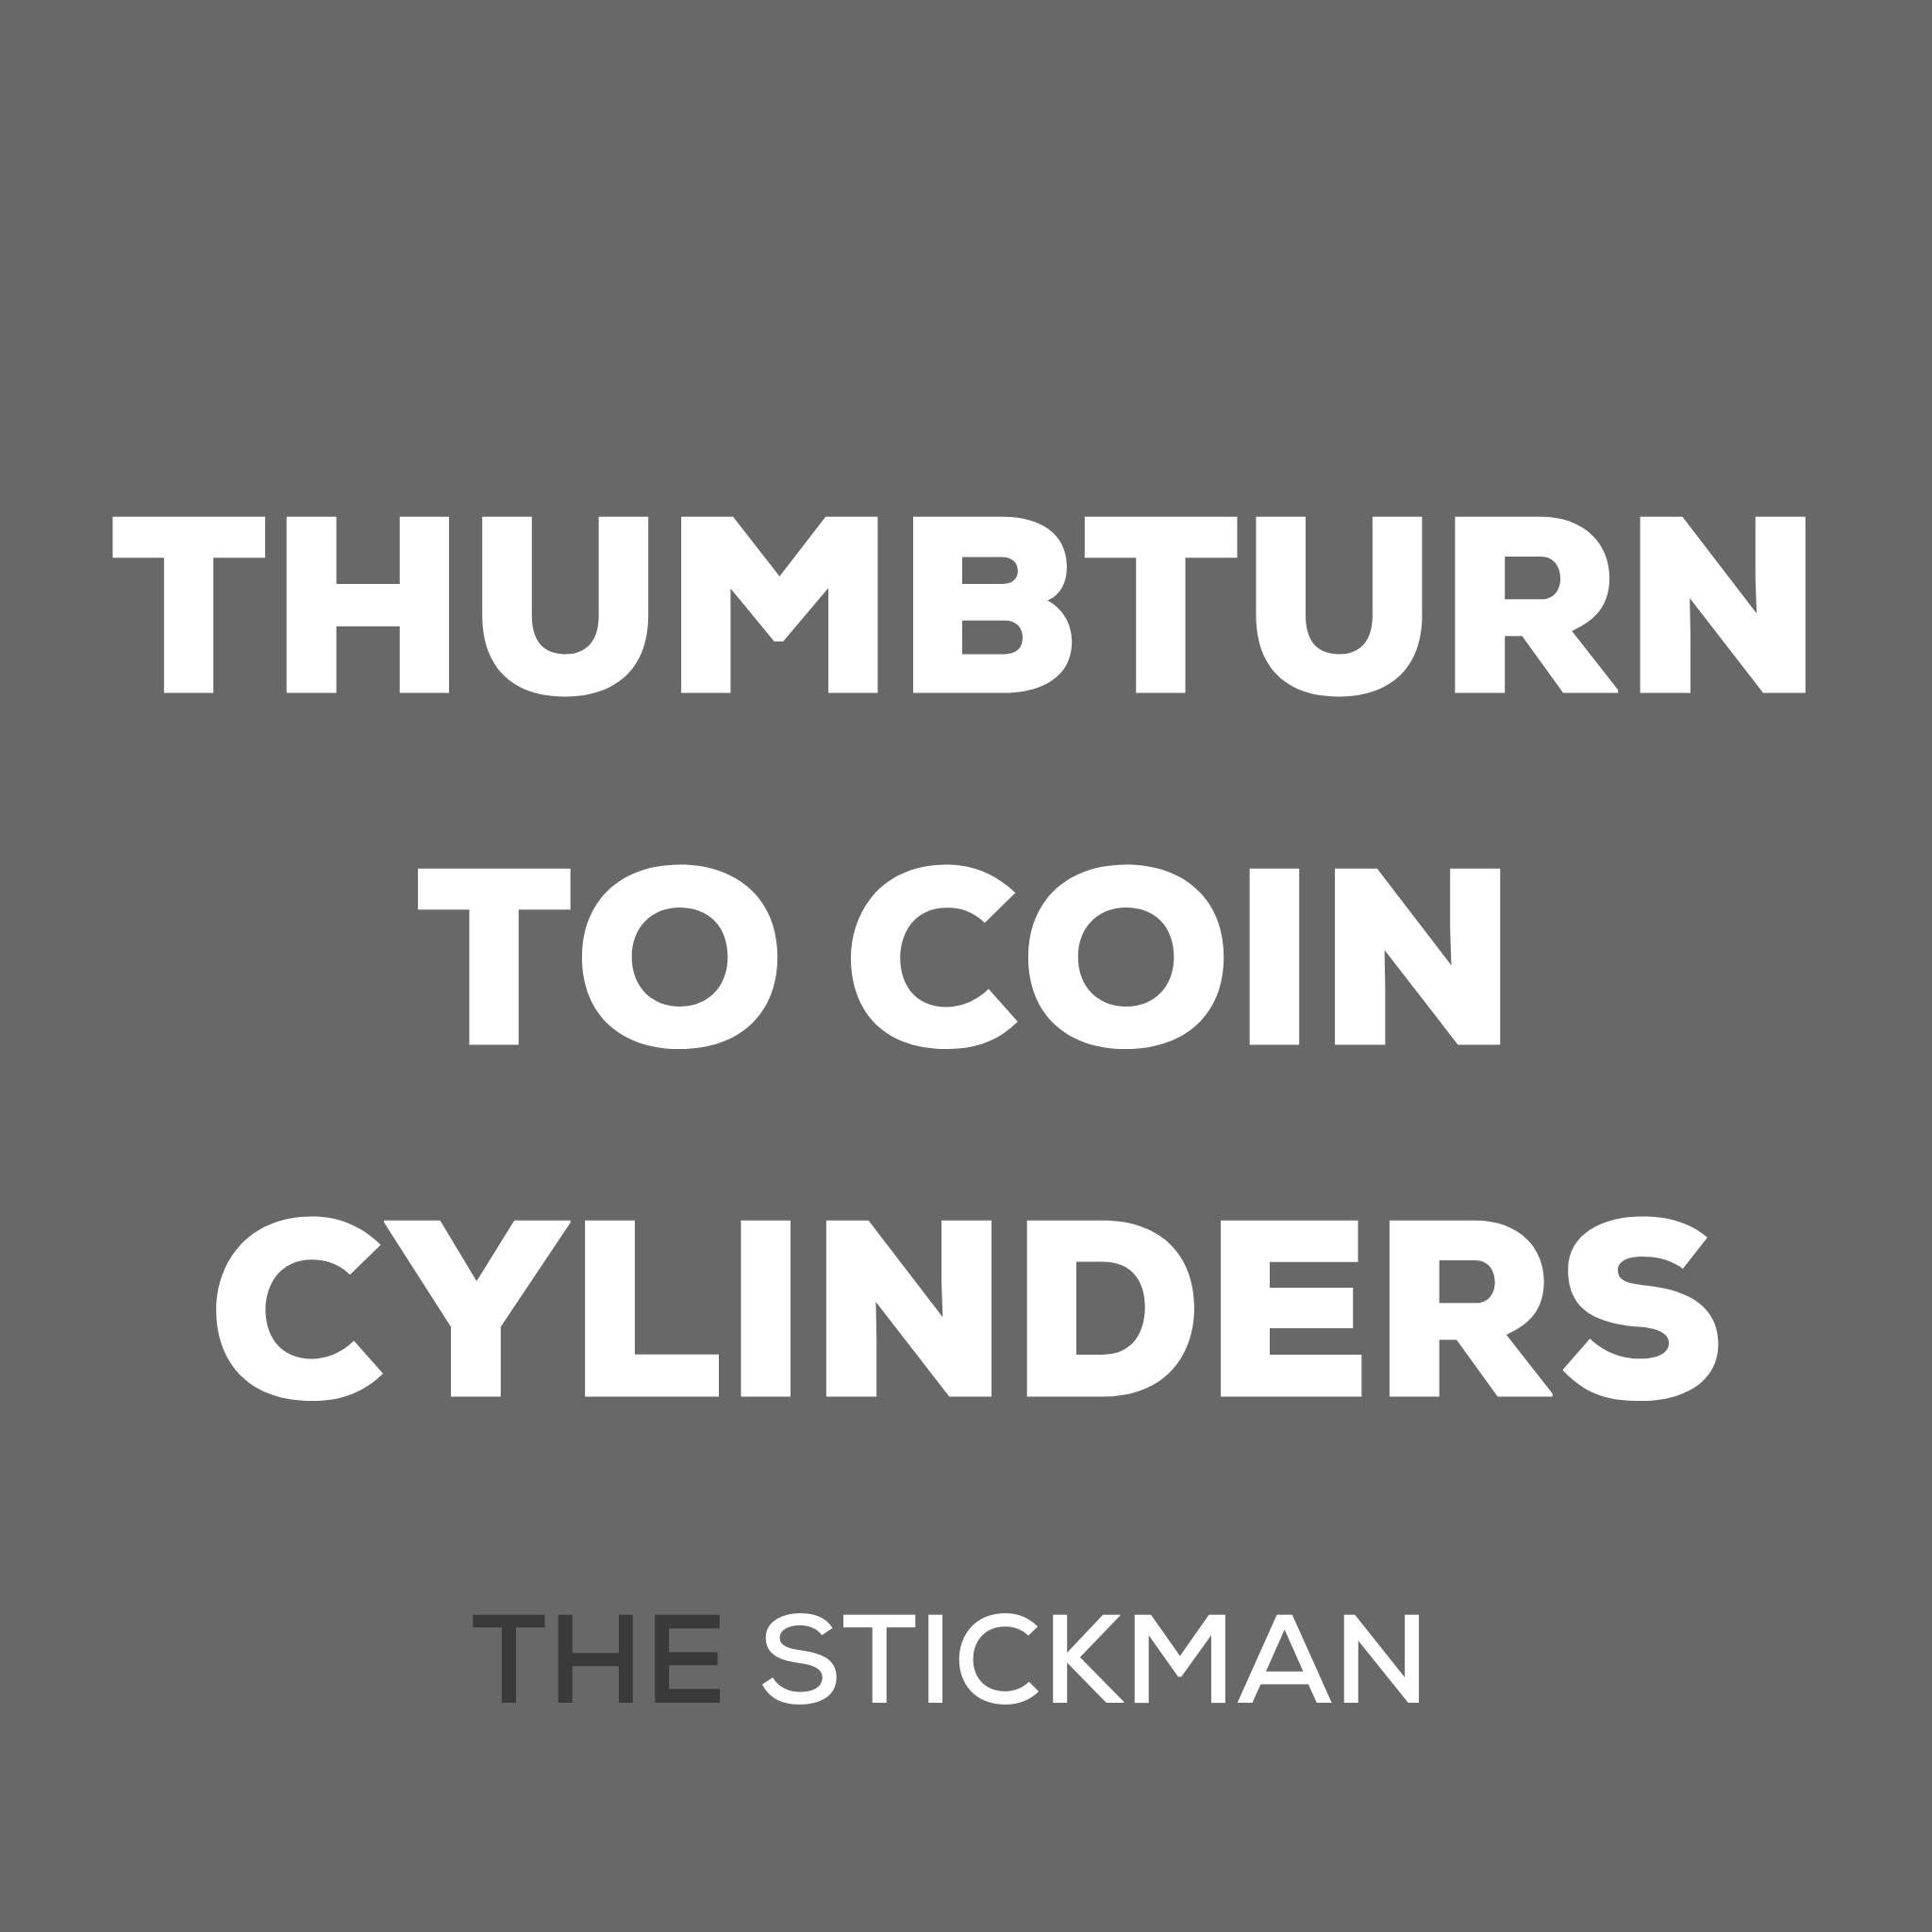 THUMBTURN TO COIN CYLINDERS